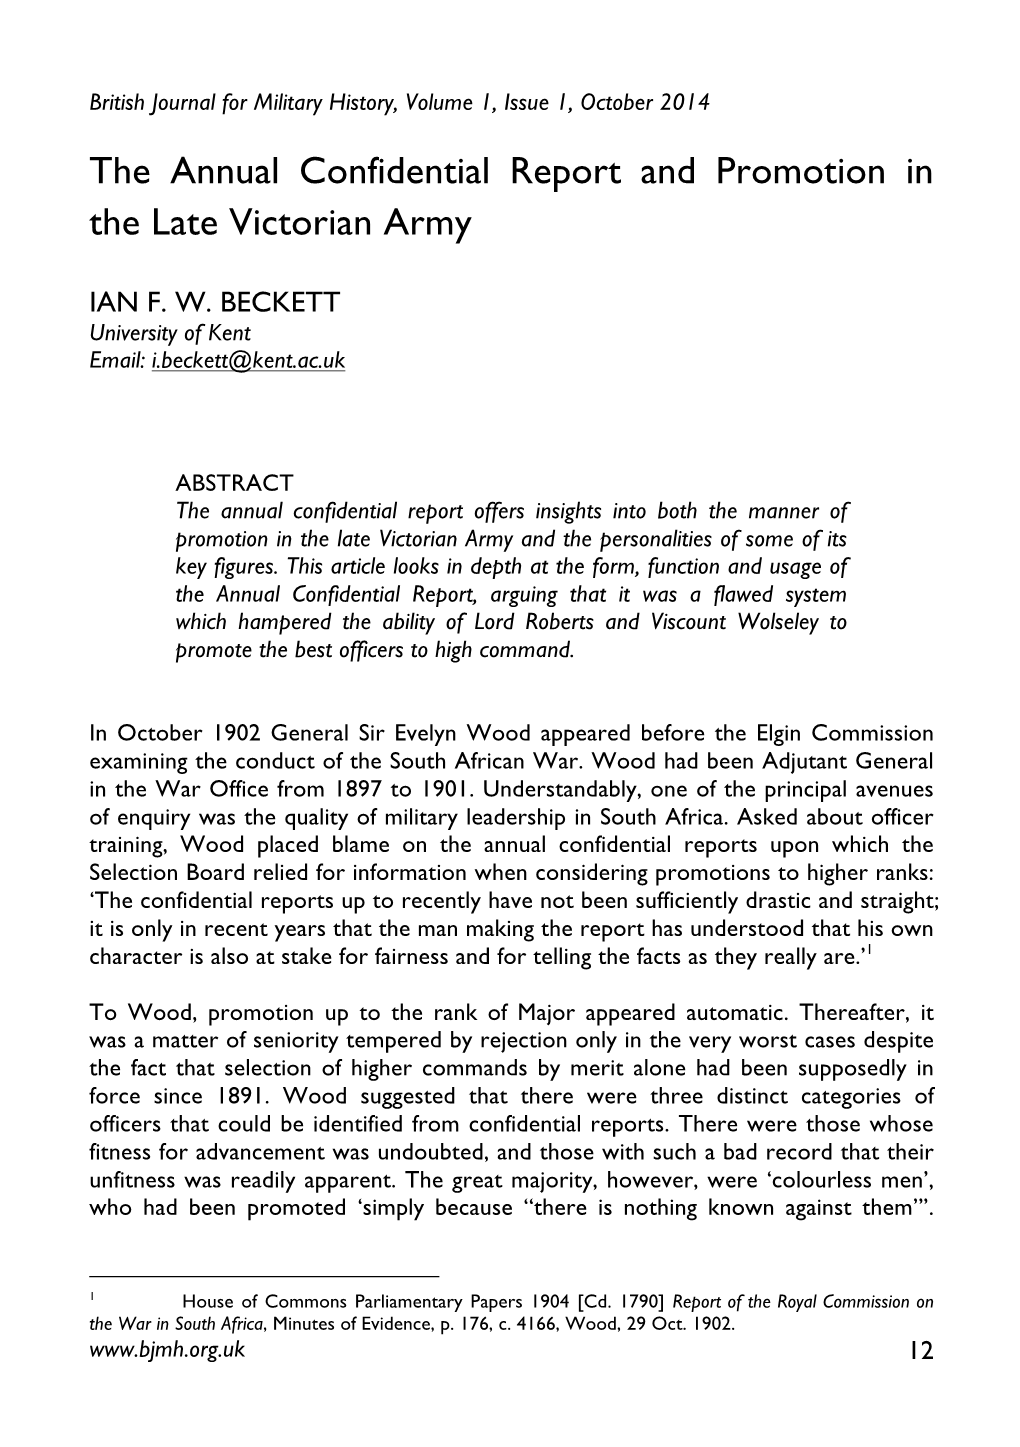 The Annual Confidential Report and Promotion in the Late Victorian Army